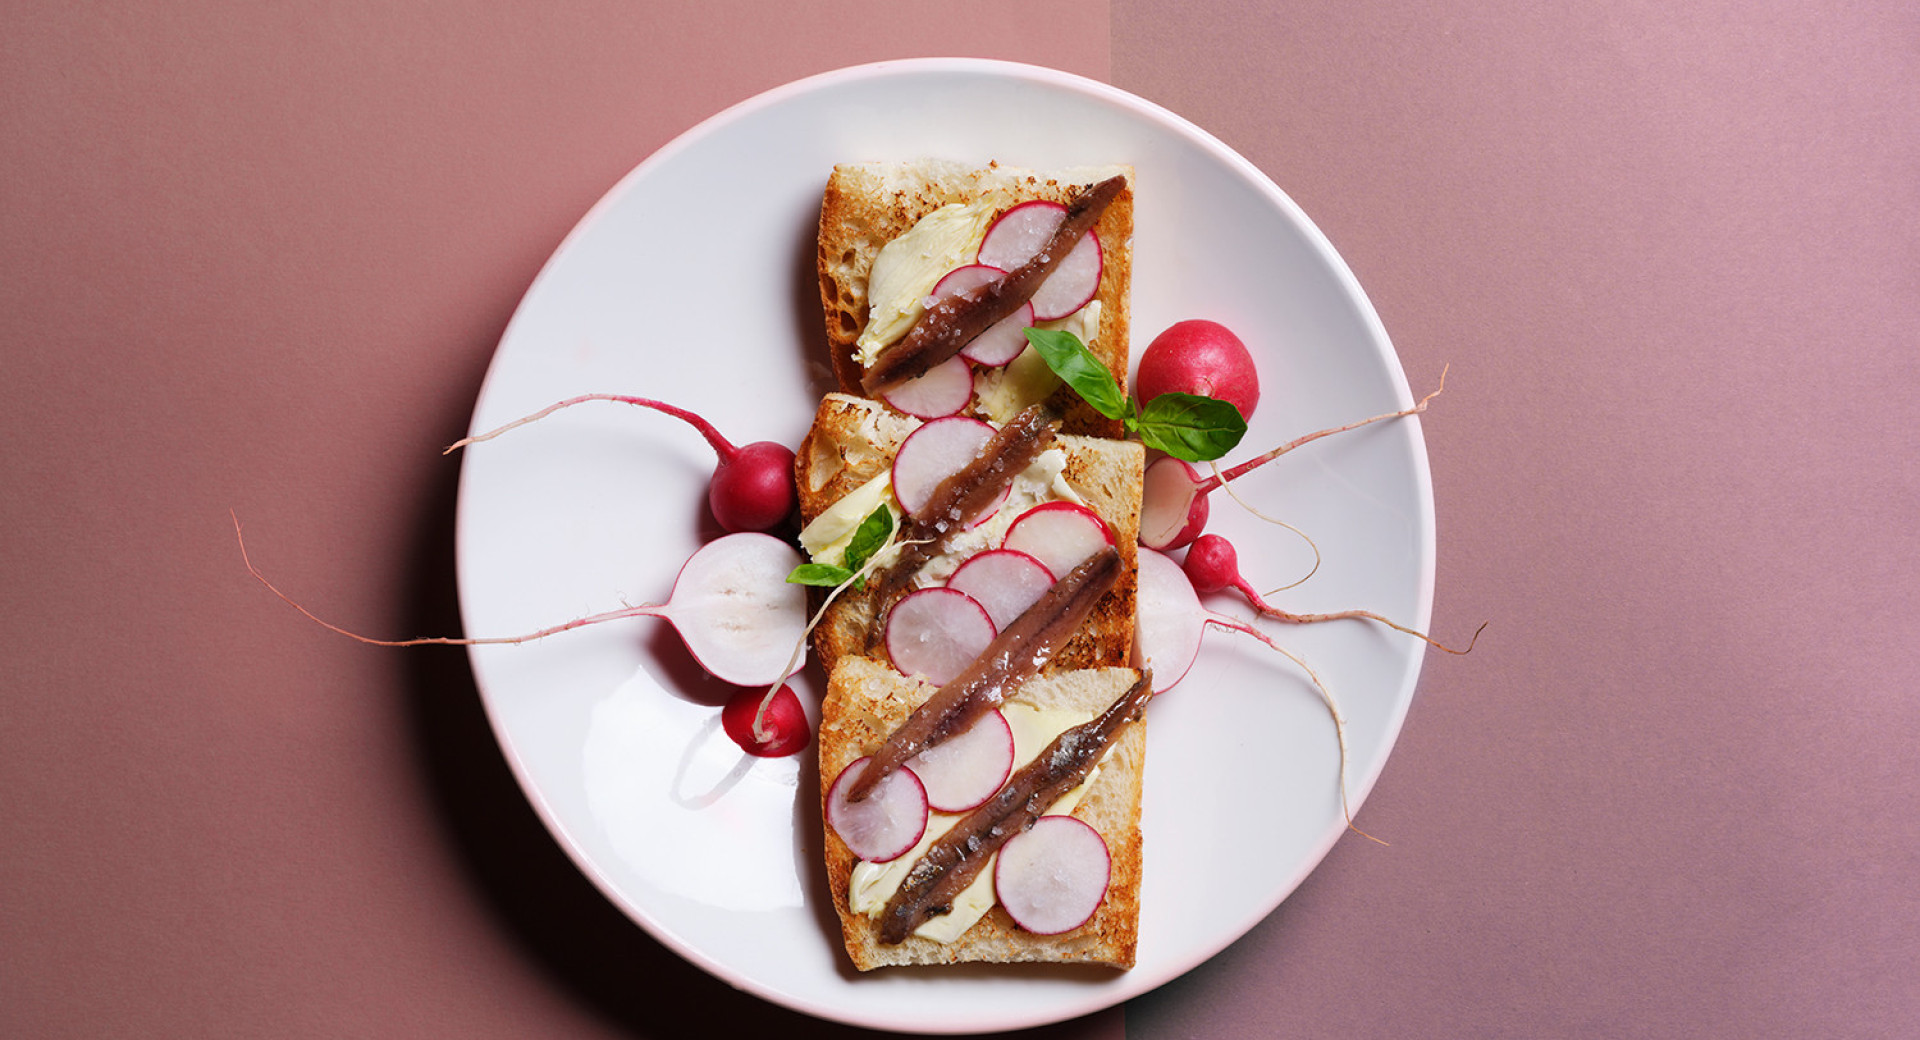 A white plate on a light and dark pink background. On the plate, neatly arranged slices of bread, spread with butter and garnished with radishes and chives.